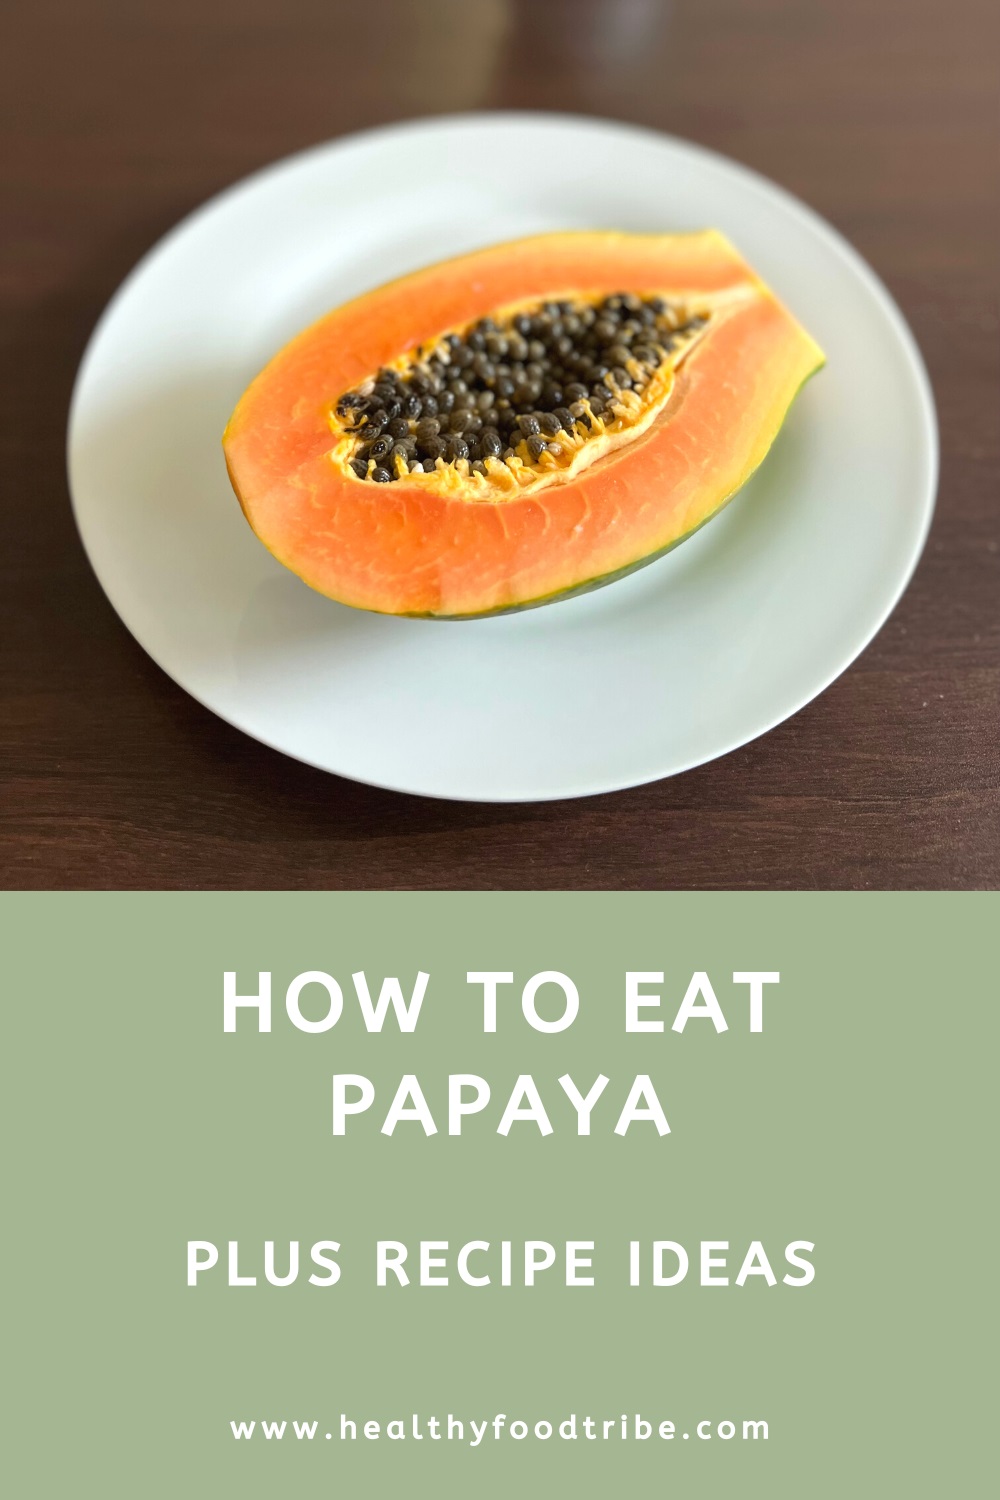 How to cut and eat a papaya fruit (plus recipe ideas)